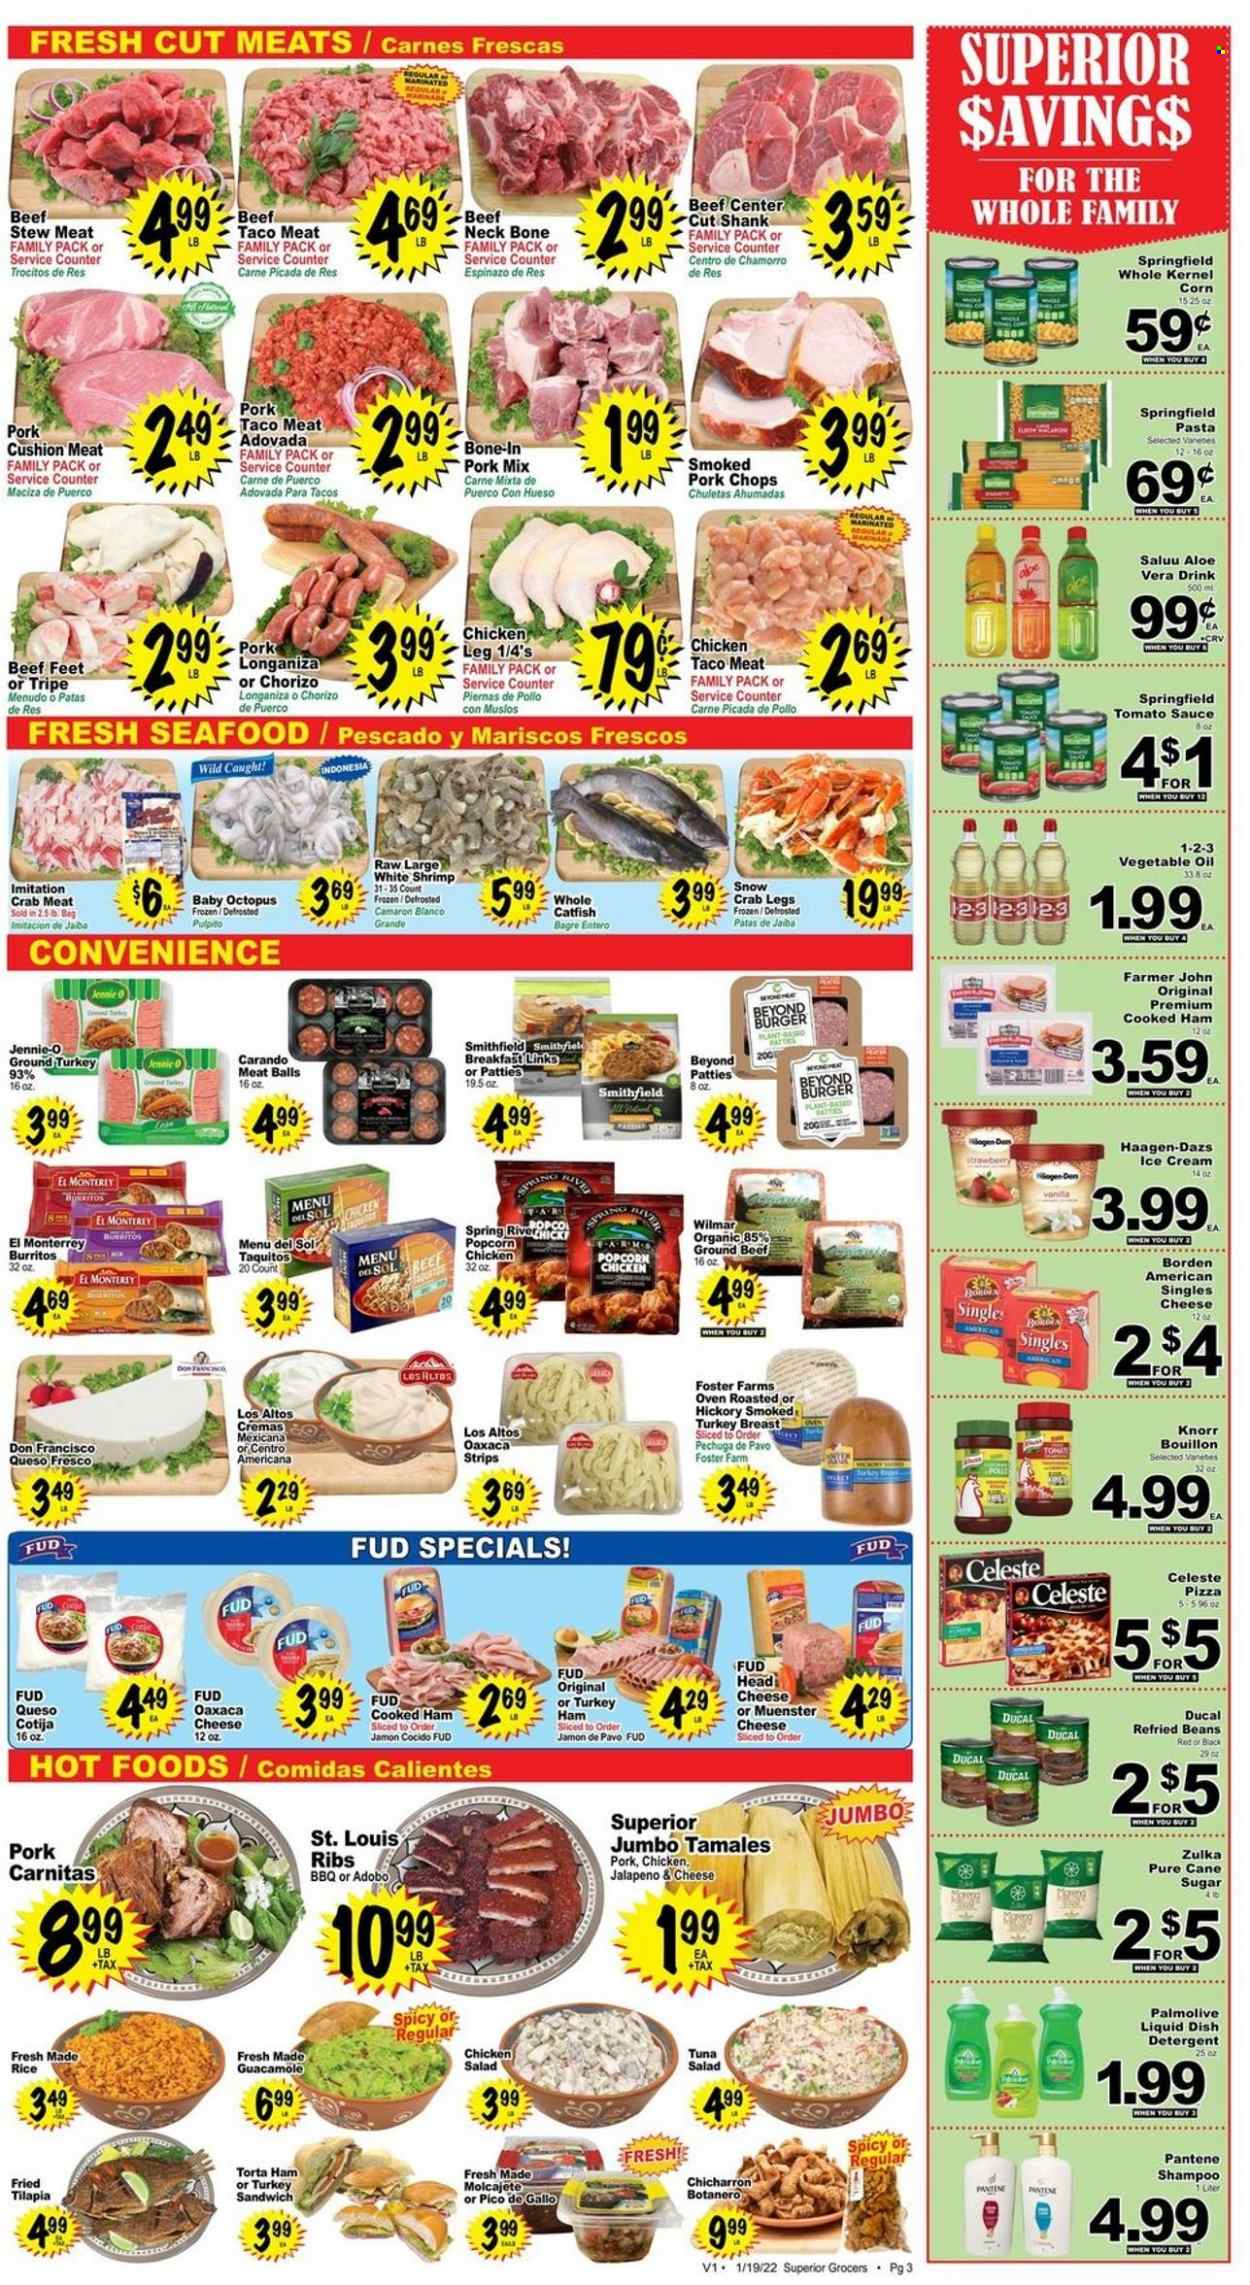 Superior Grocers ad  - 01.19.2022 - 01.25.2022.